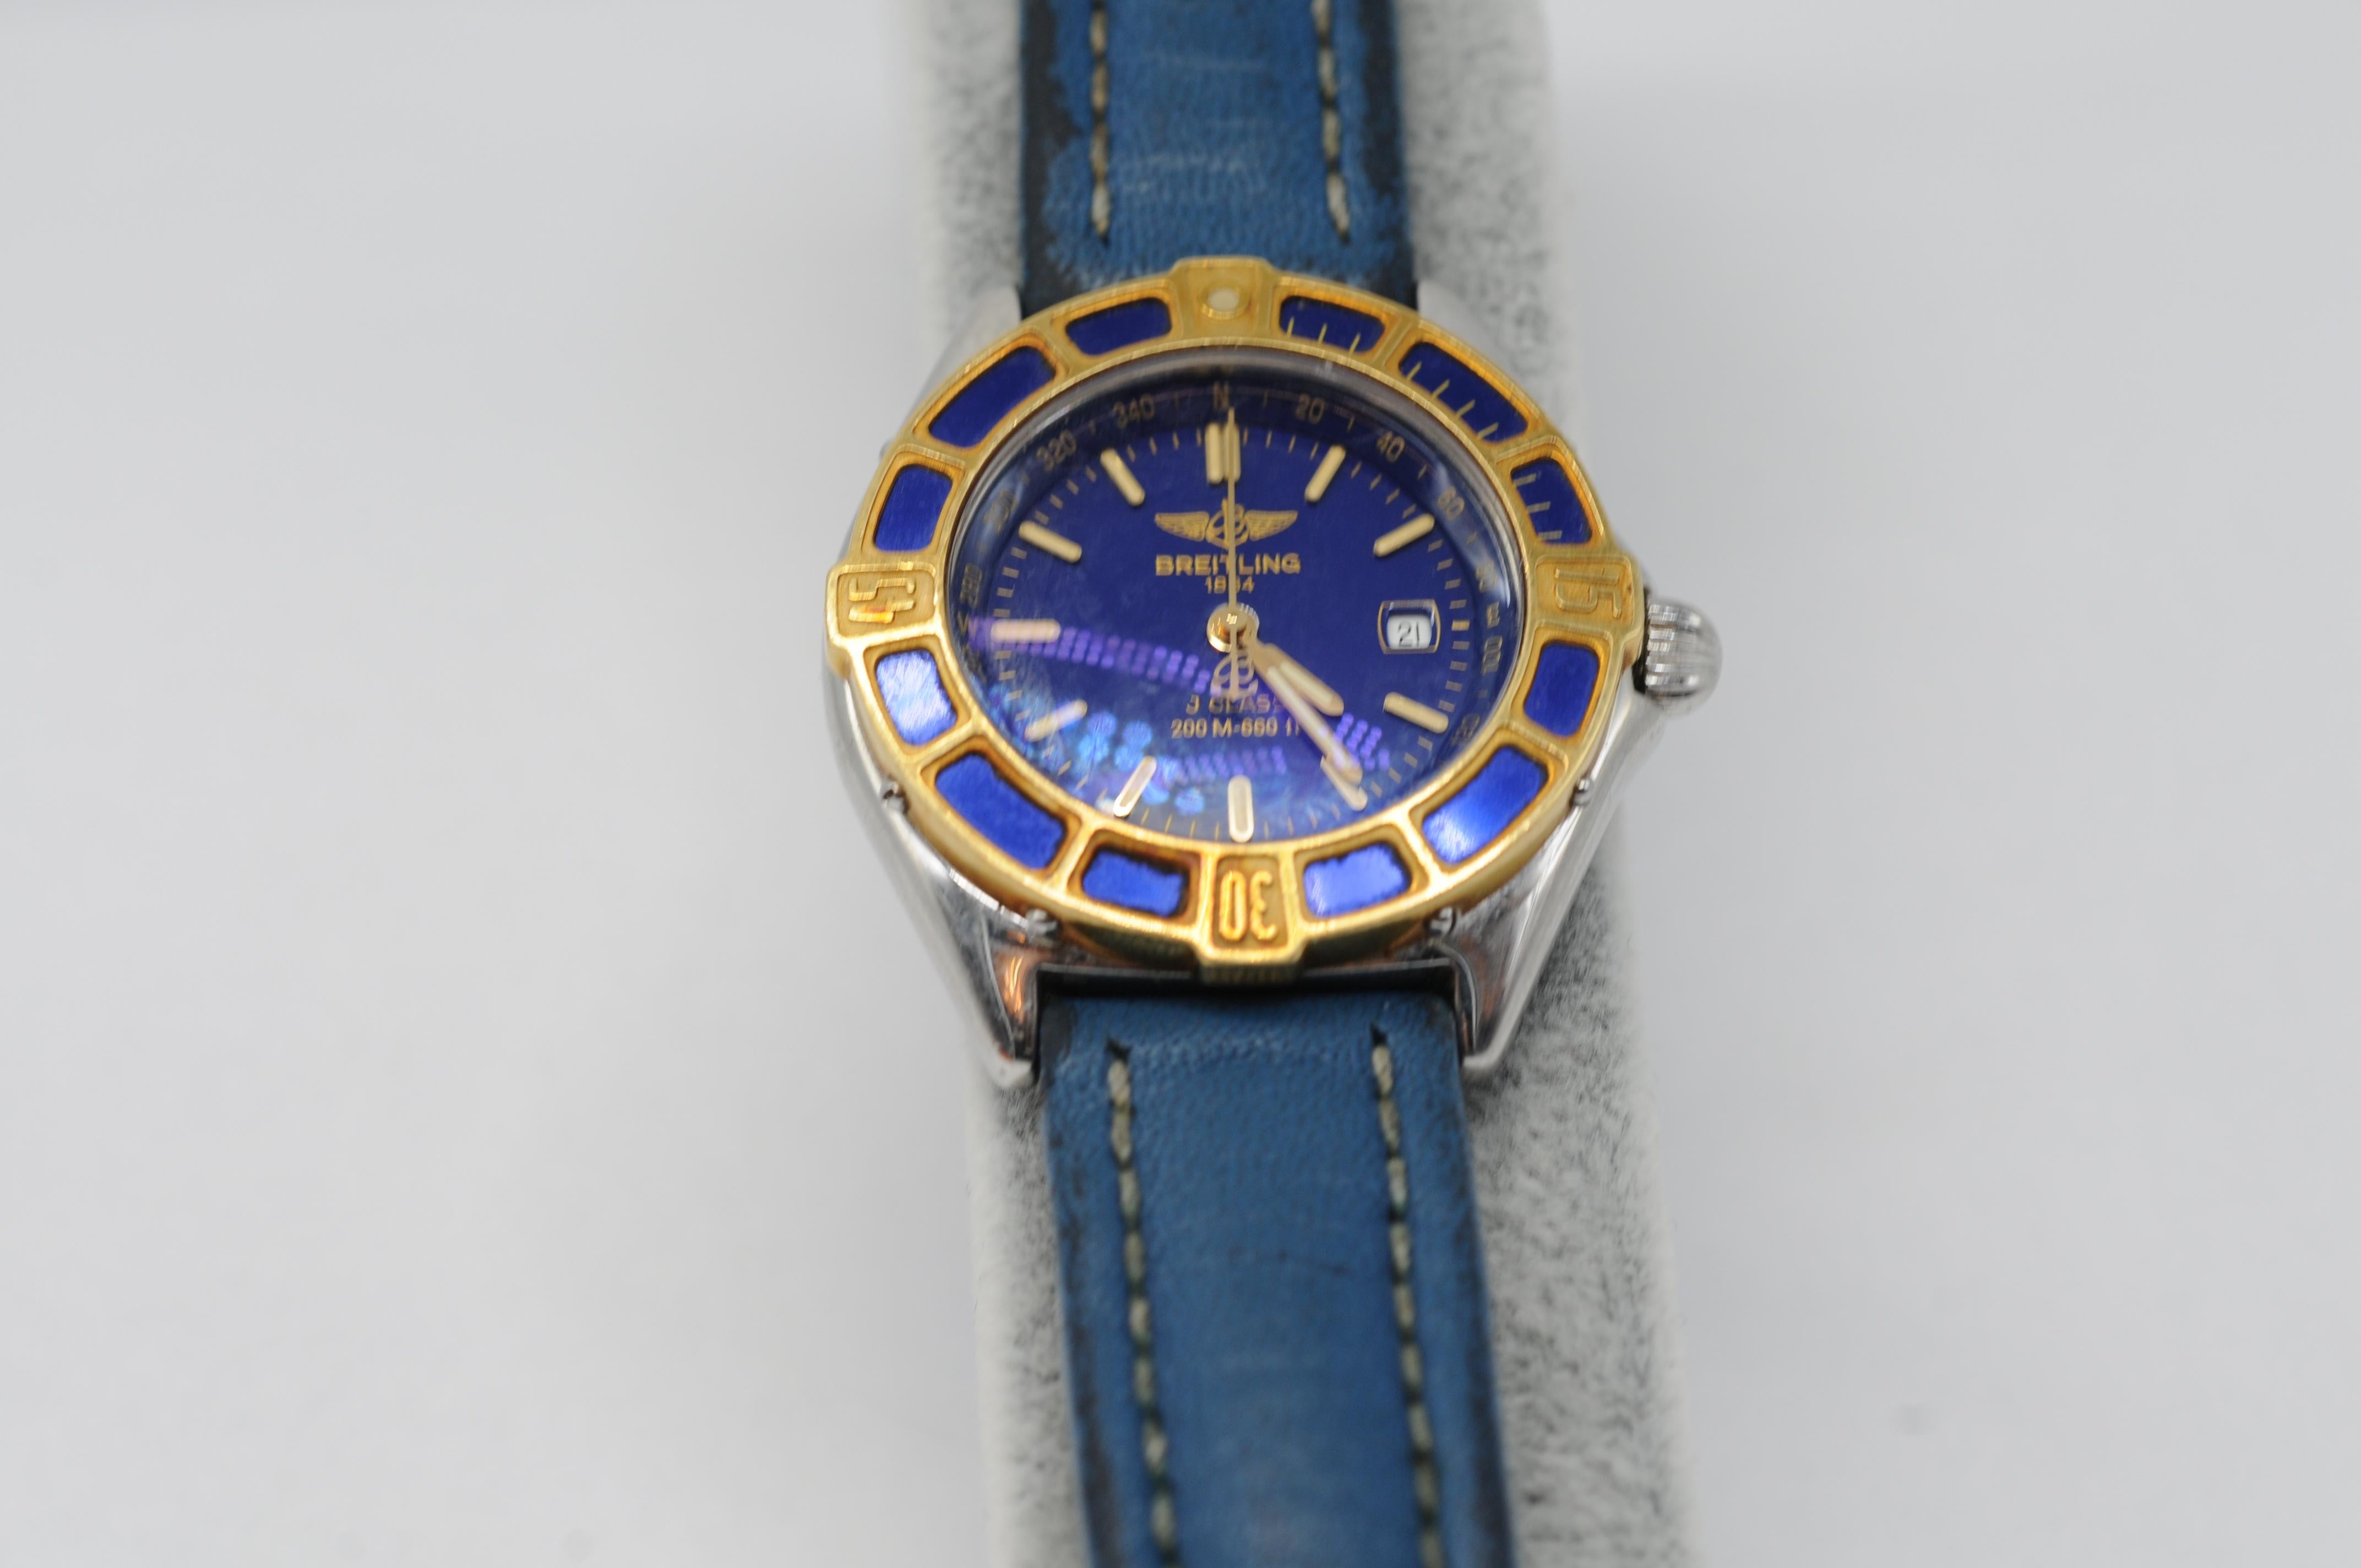 Breitling Lady J D52065 with a deep blue leather strap For Sale 2